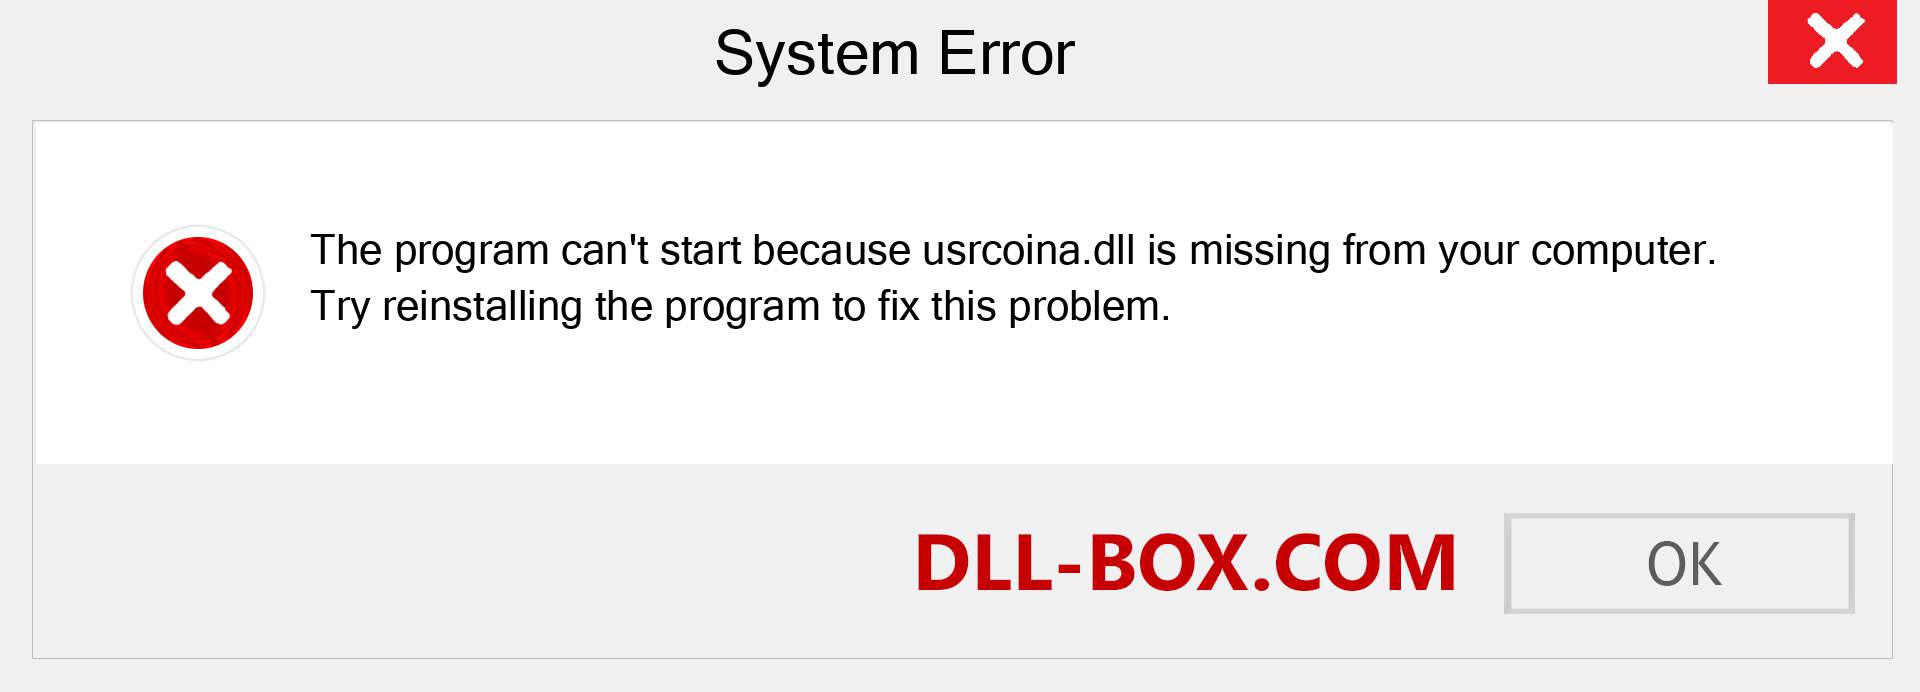  usrcoina.dll file is missing?. Download for Windows 7, 8, 10 - Fix  usrcoina dll Missing Error on Windows, photos, images